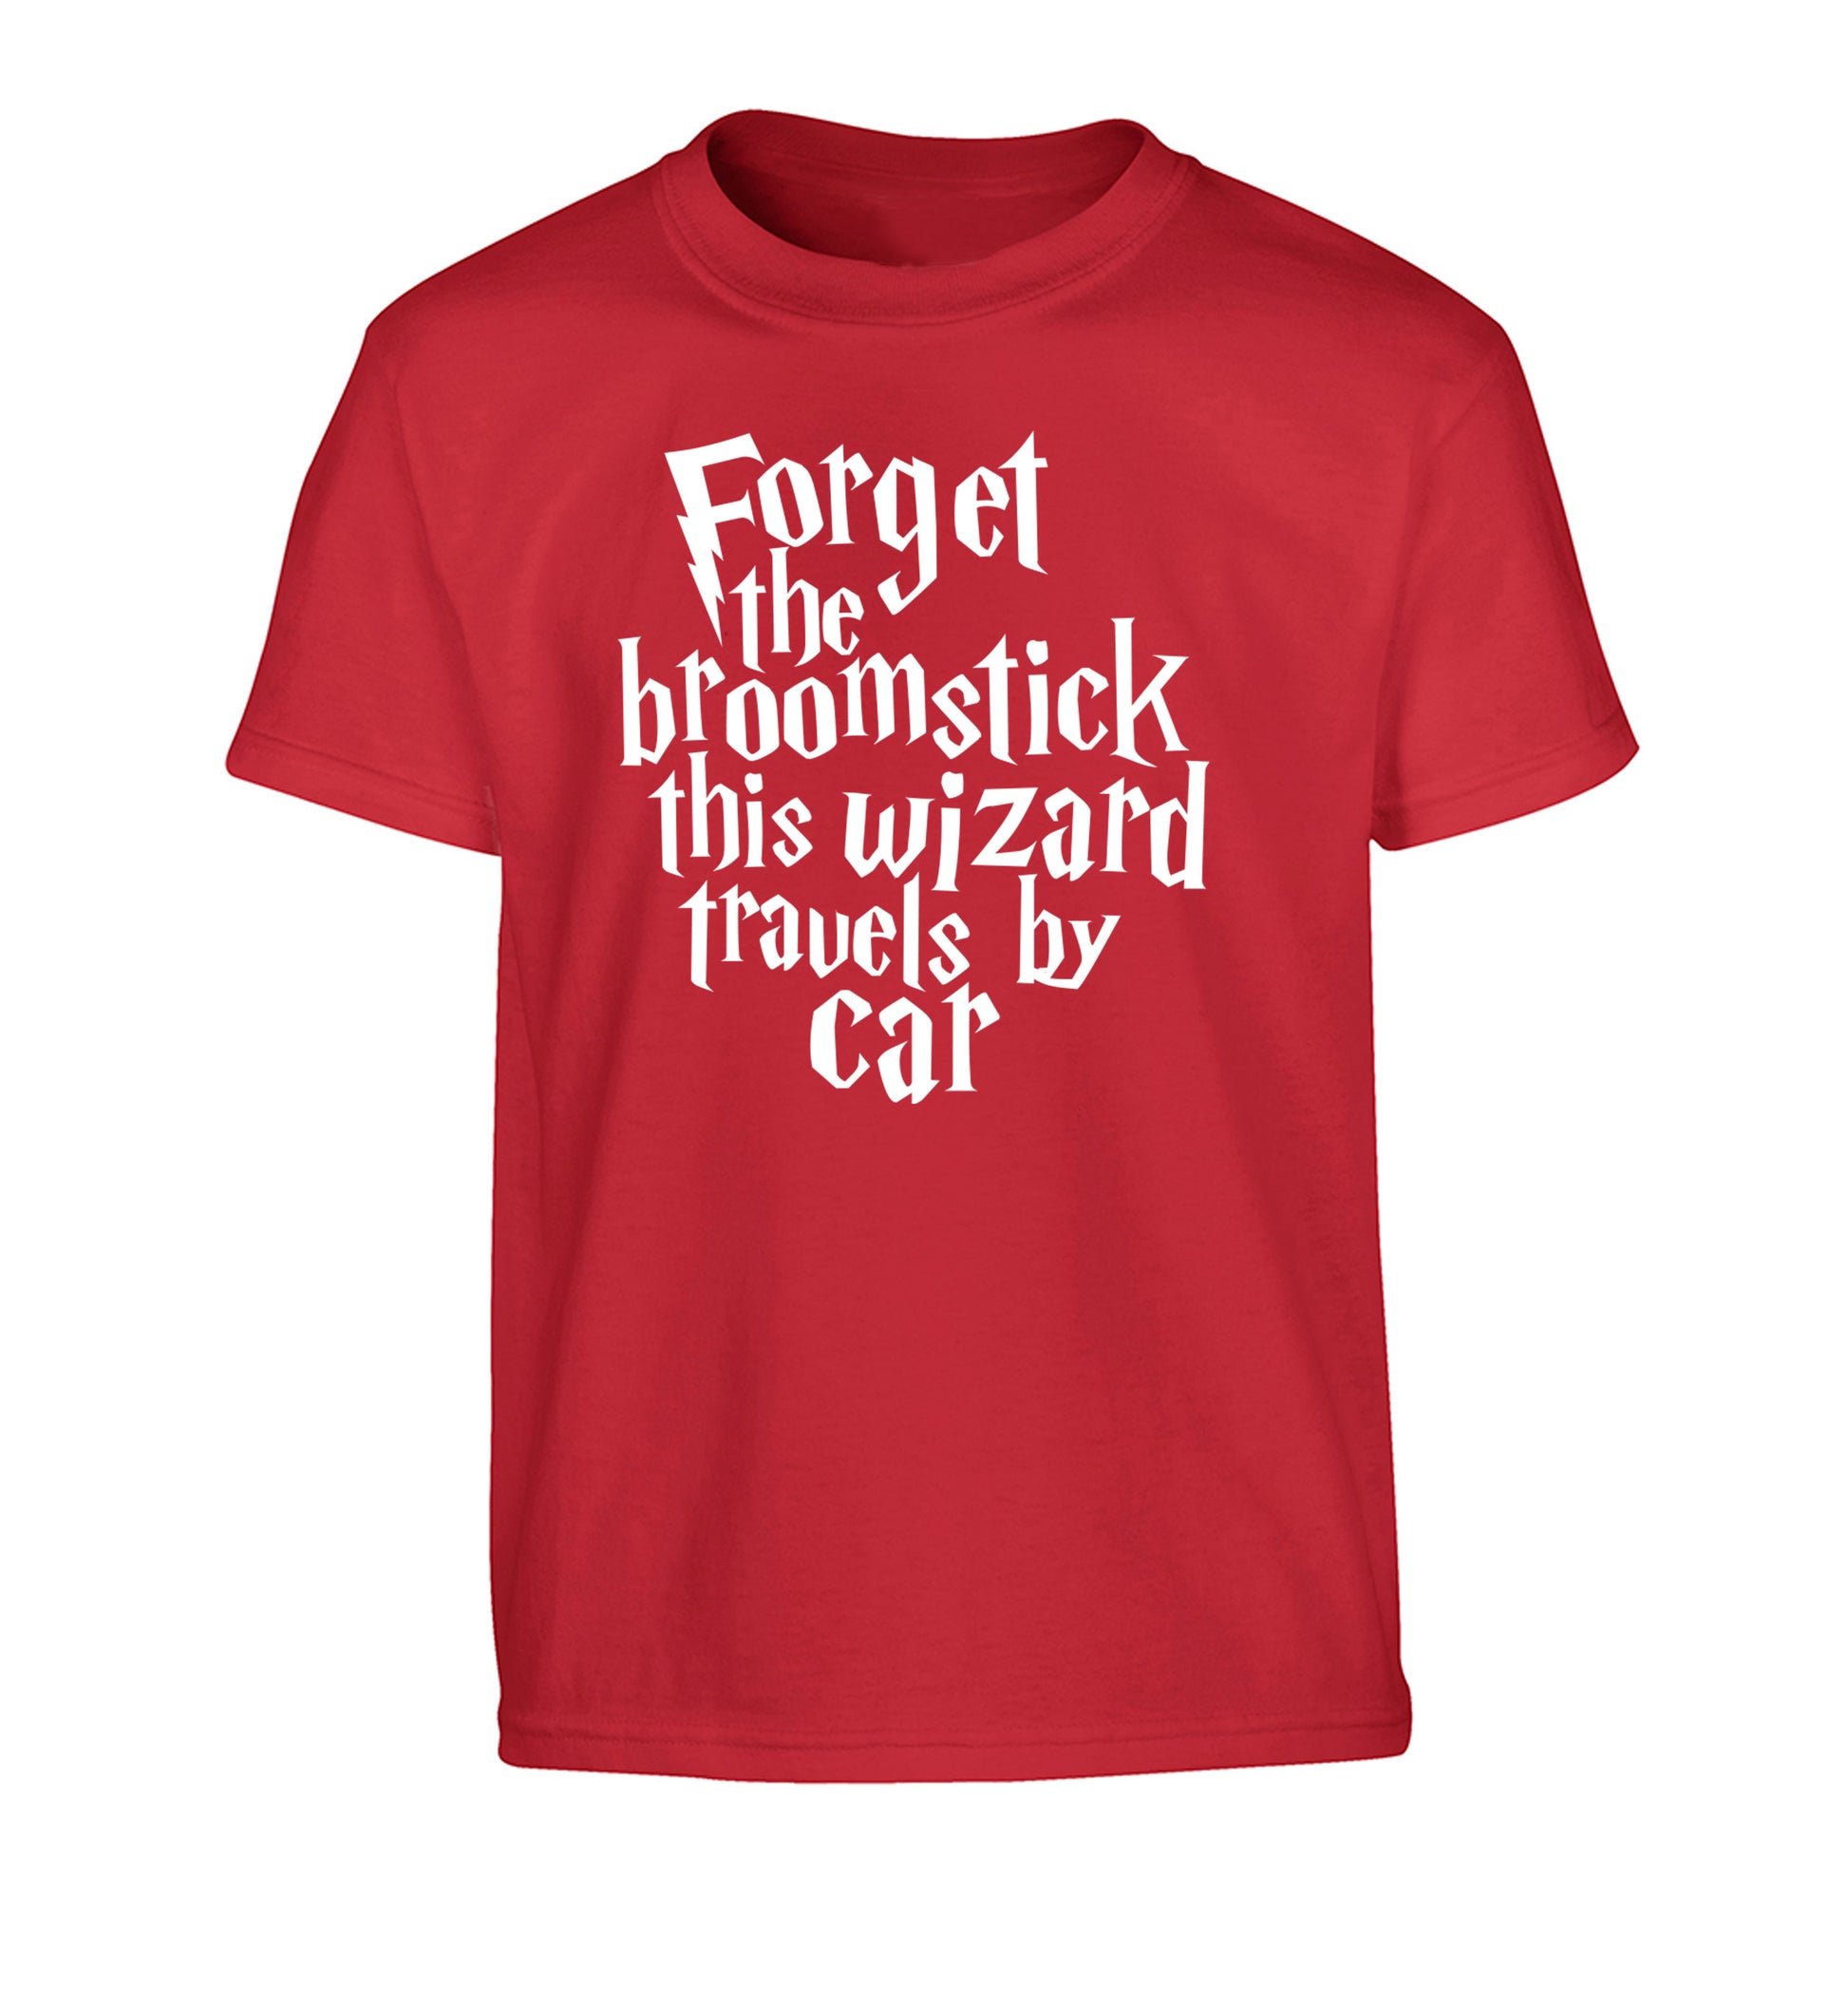 Forget the broomstick this wizard travels by car Children's red Tshirt 12-14 Years